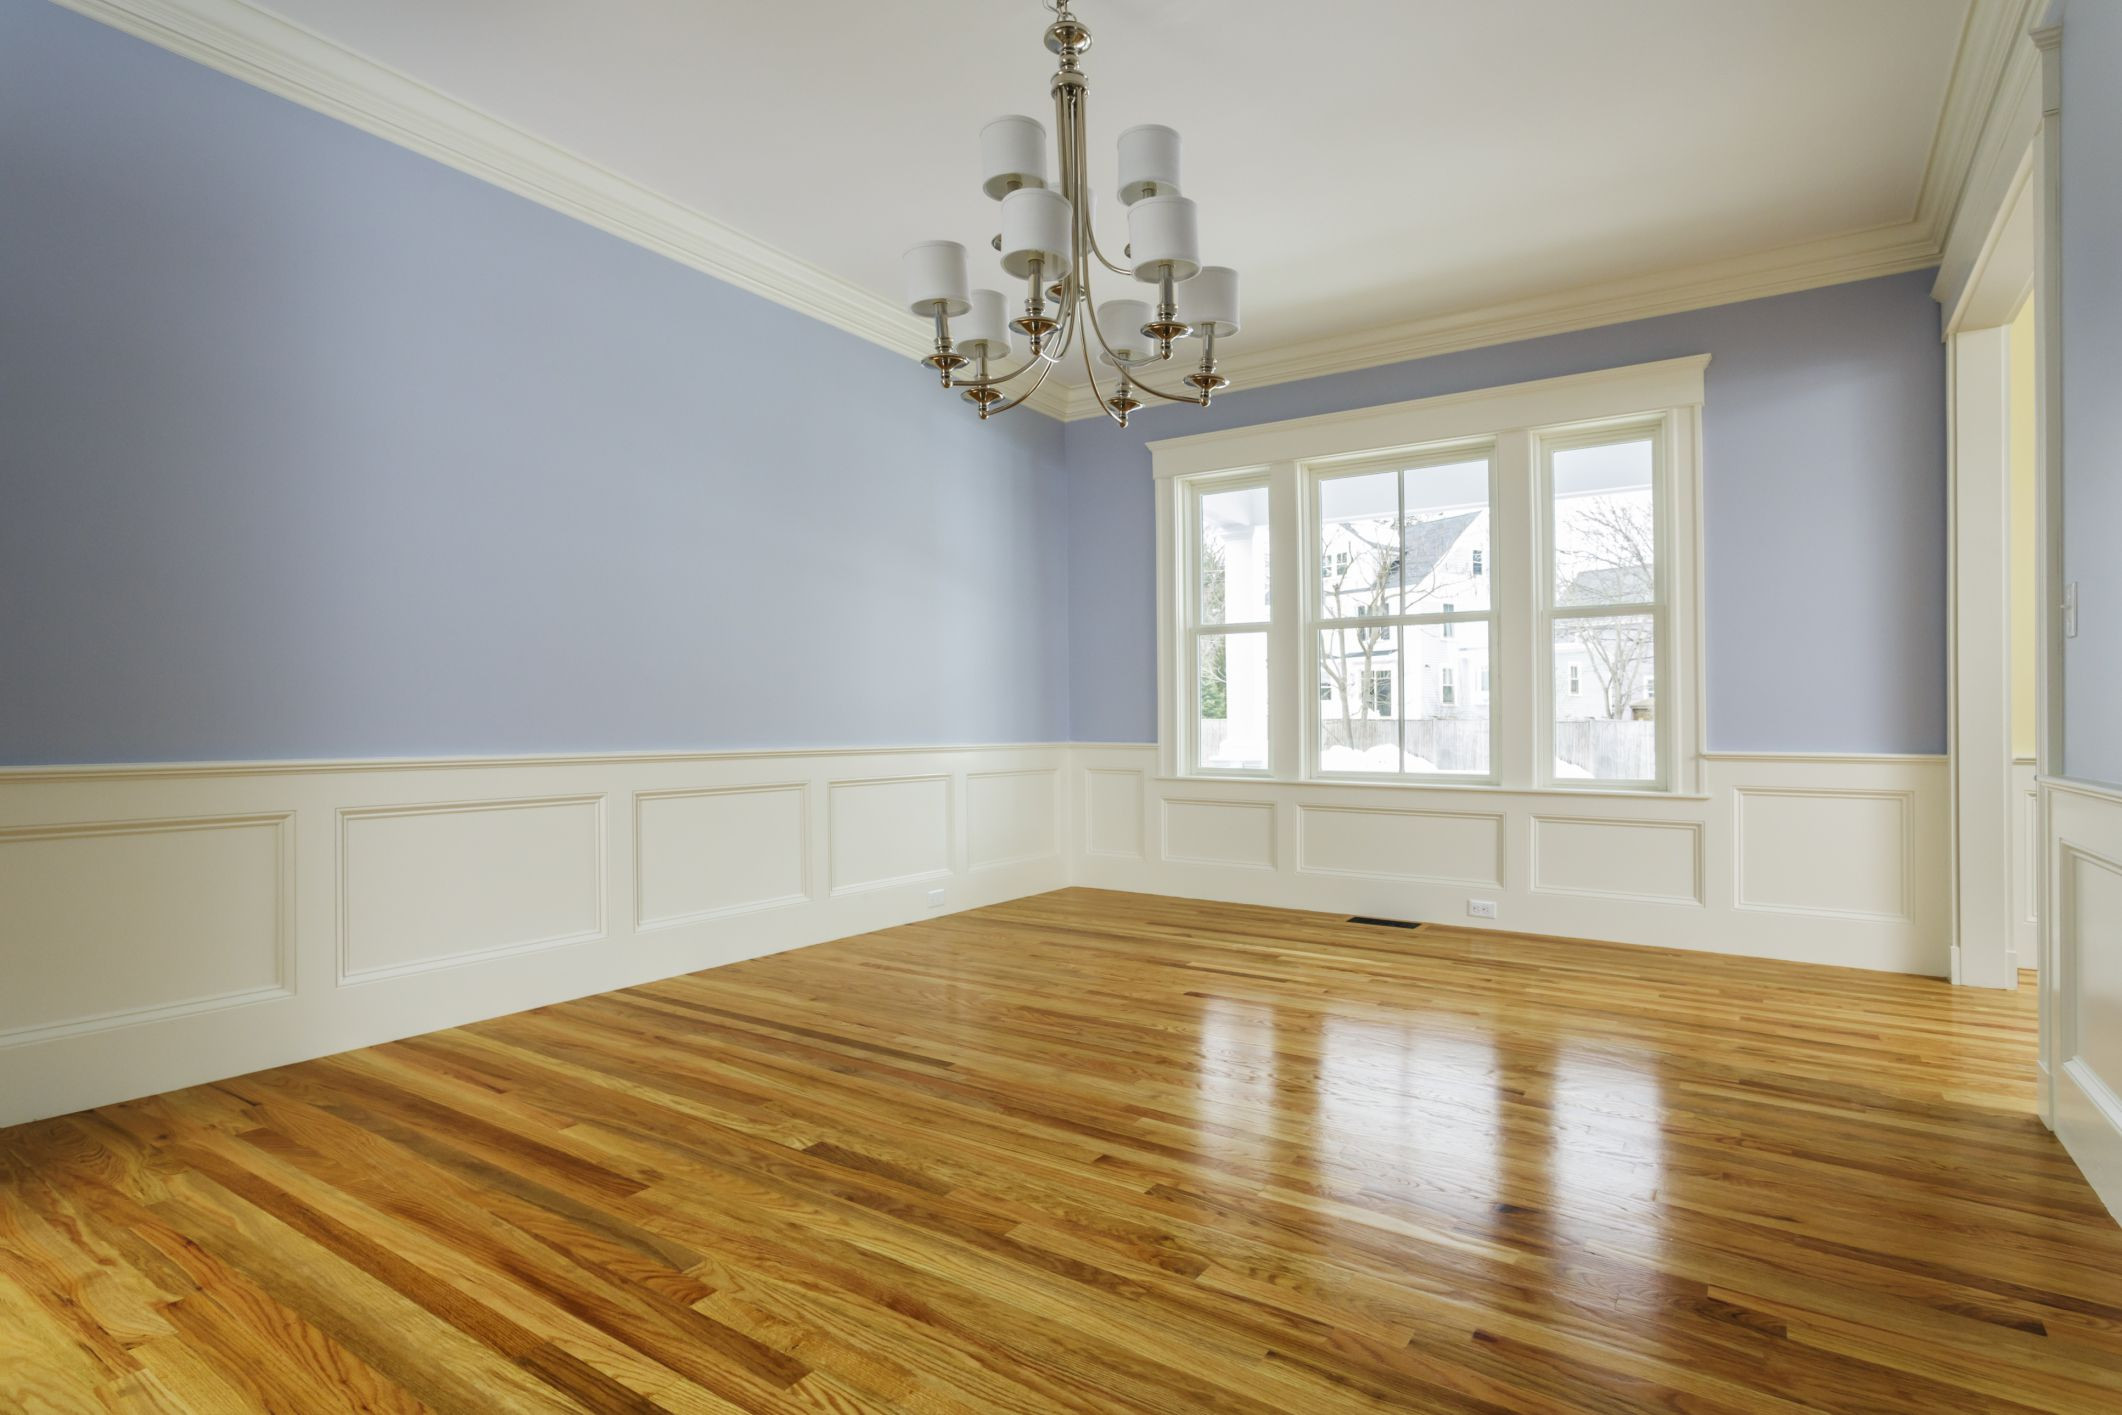 15 Awesome Knoxville Hardwood Floor Refinishing 2024 free download knoxville hardwood floor refinishing of how to make hardwood floors shiny inside 168686572 56a4e87c3df78cf7728544a2